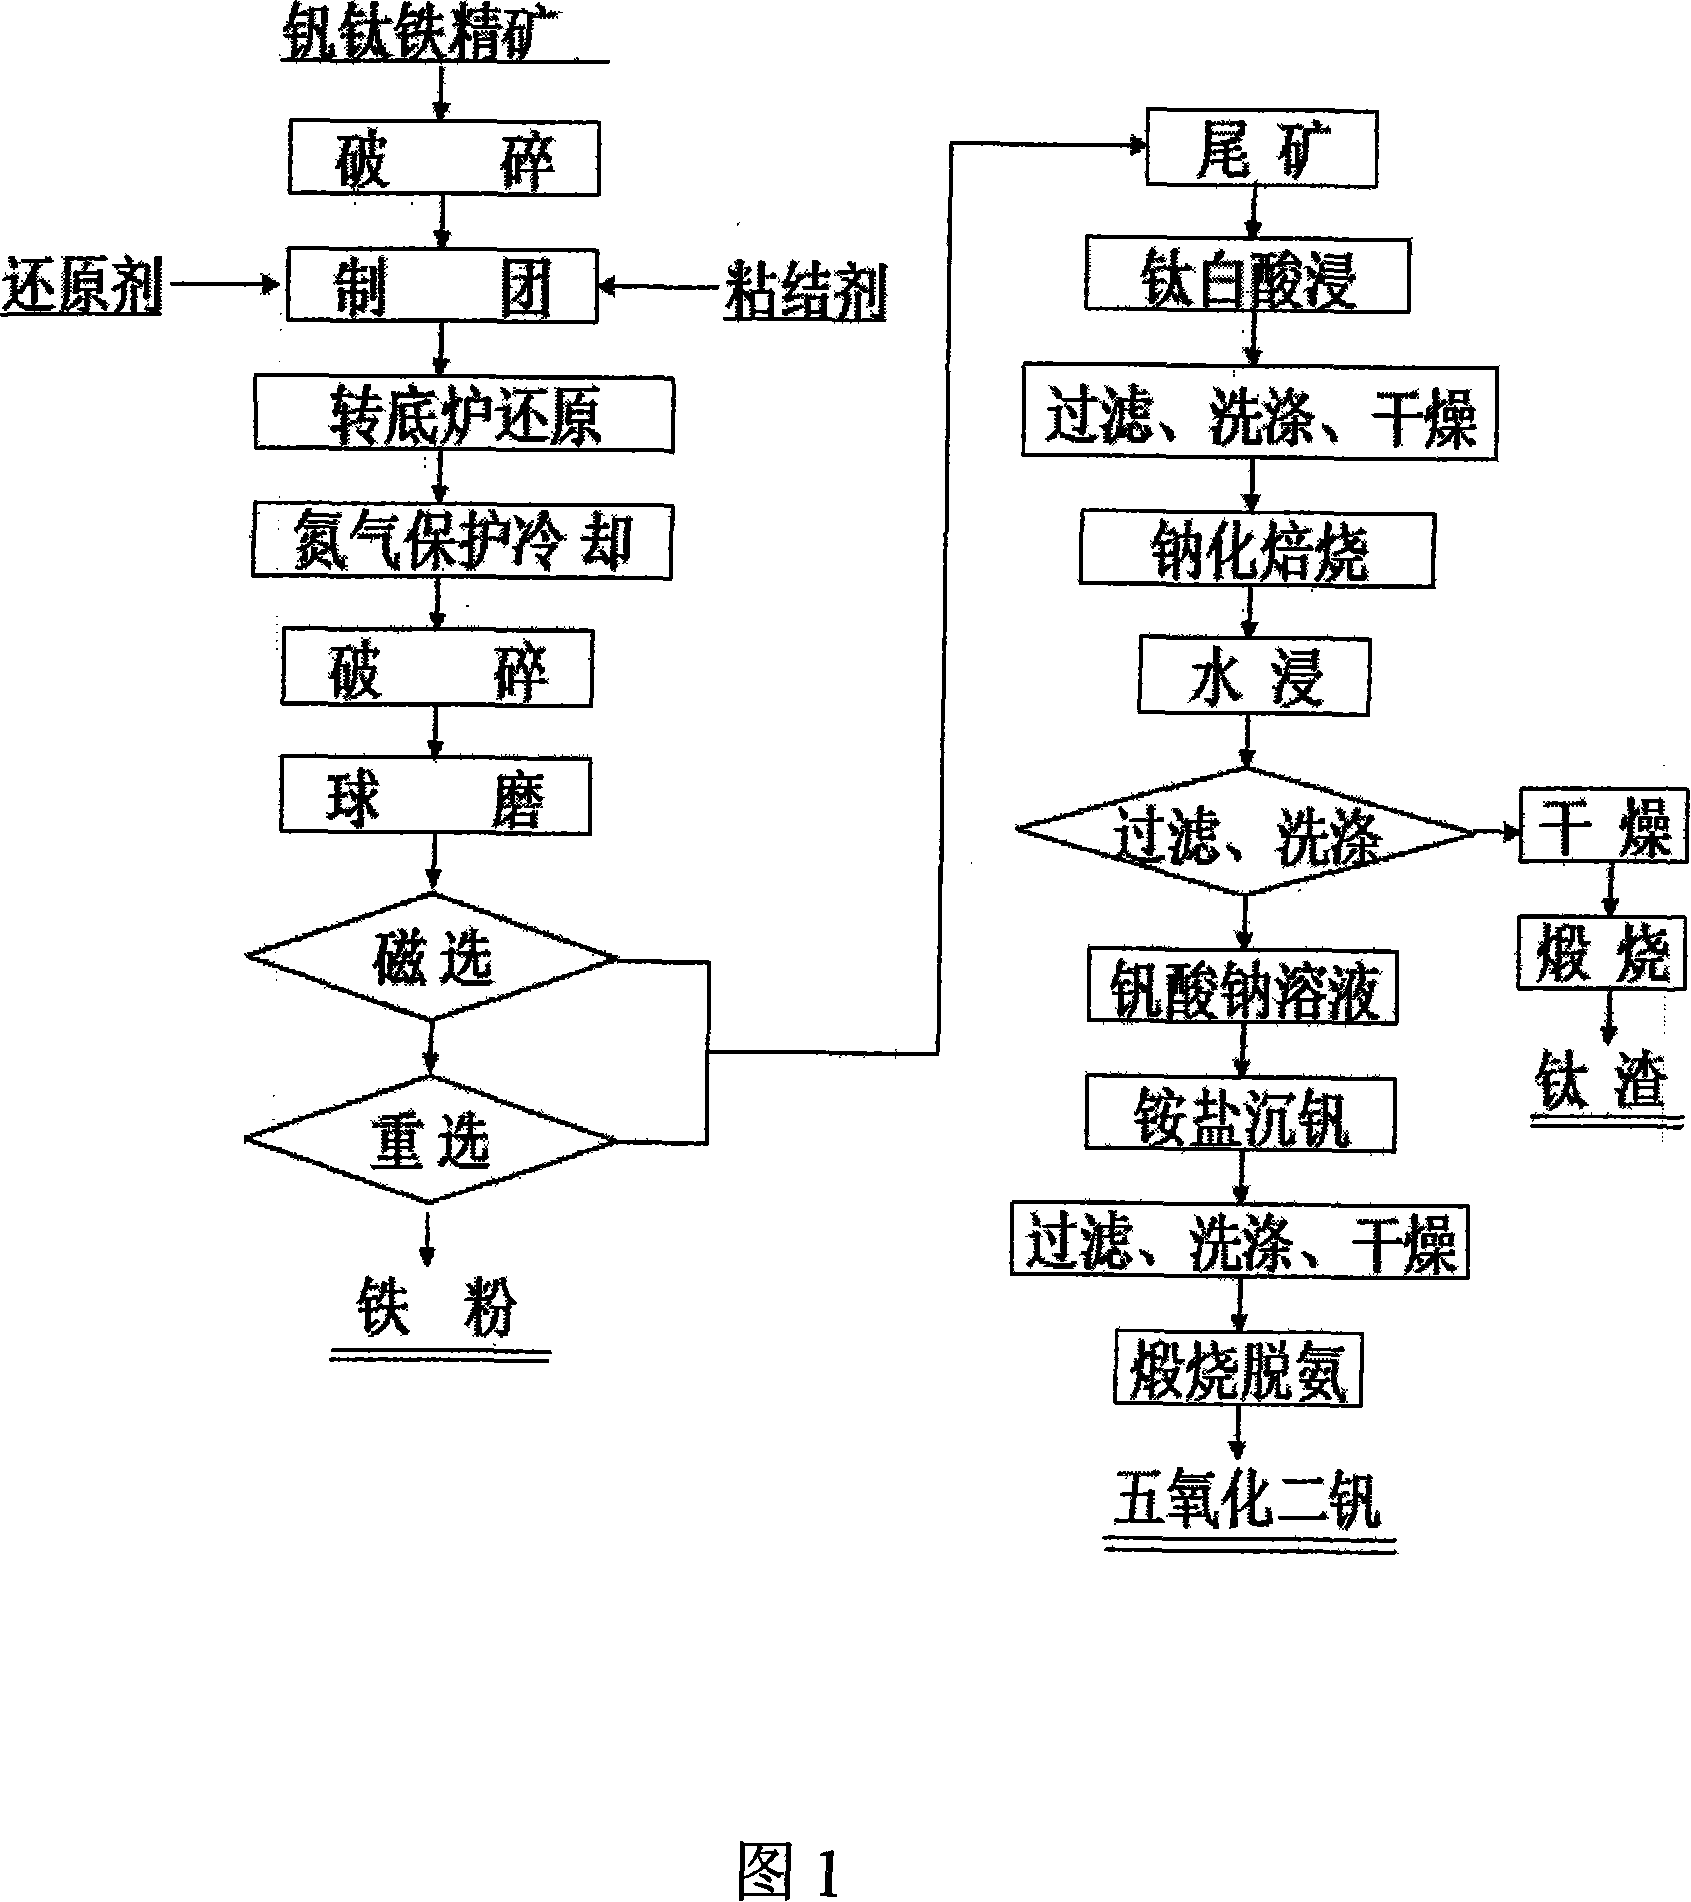 Method for comprehensive utilization of vanadium titanium and iron ore concentrate by using rotary hearth furnace reduction-grinding - separation